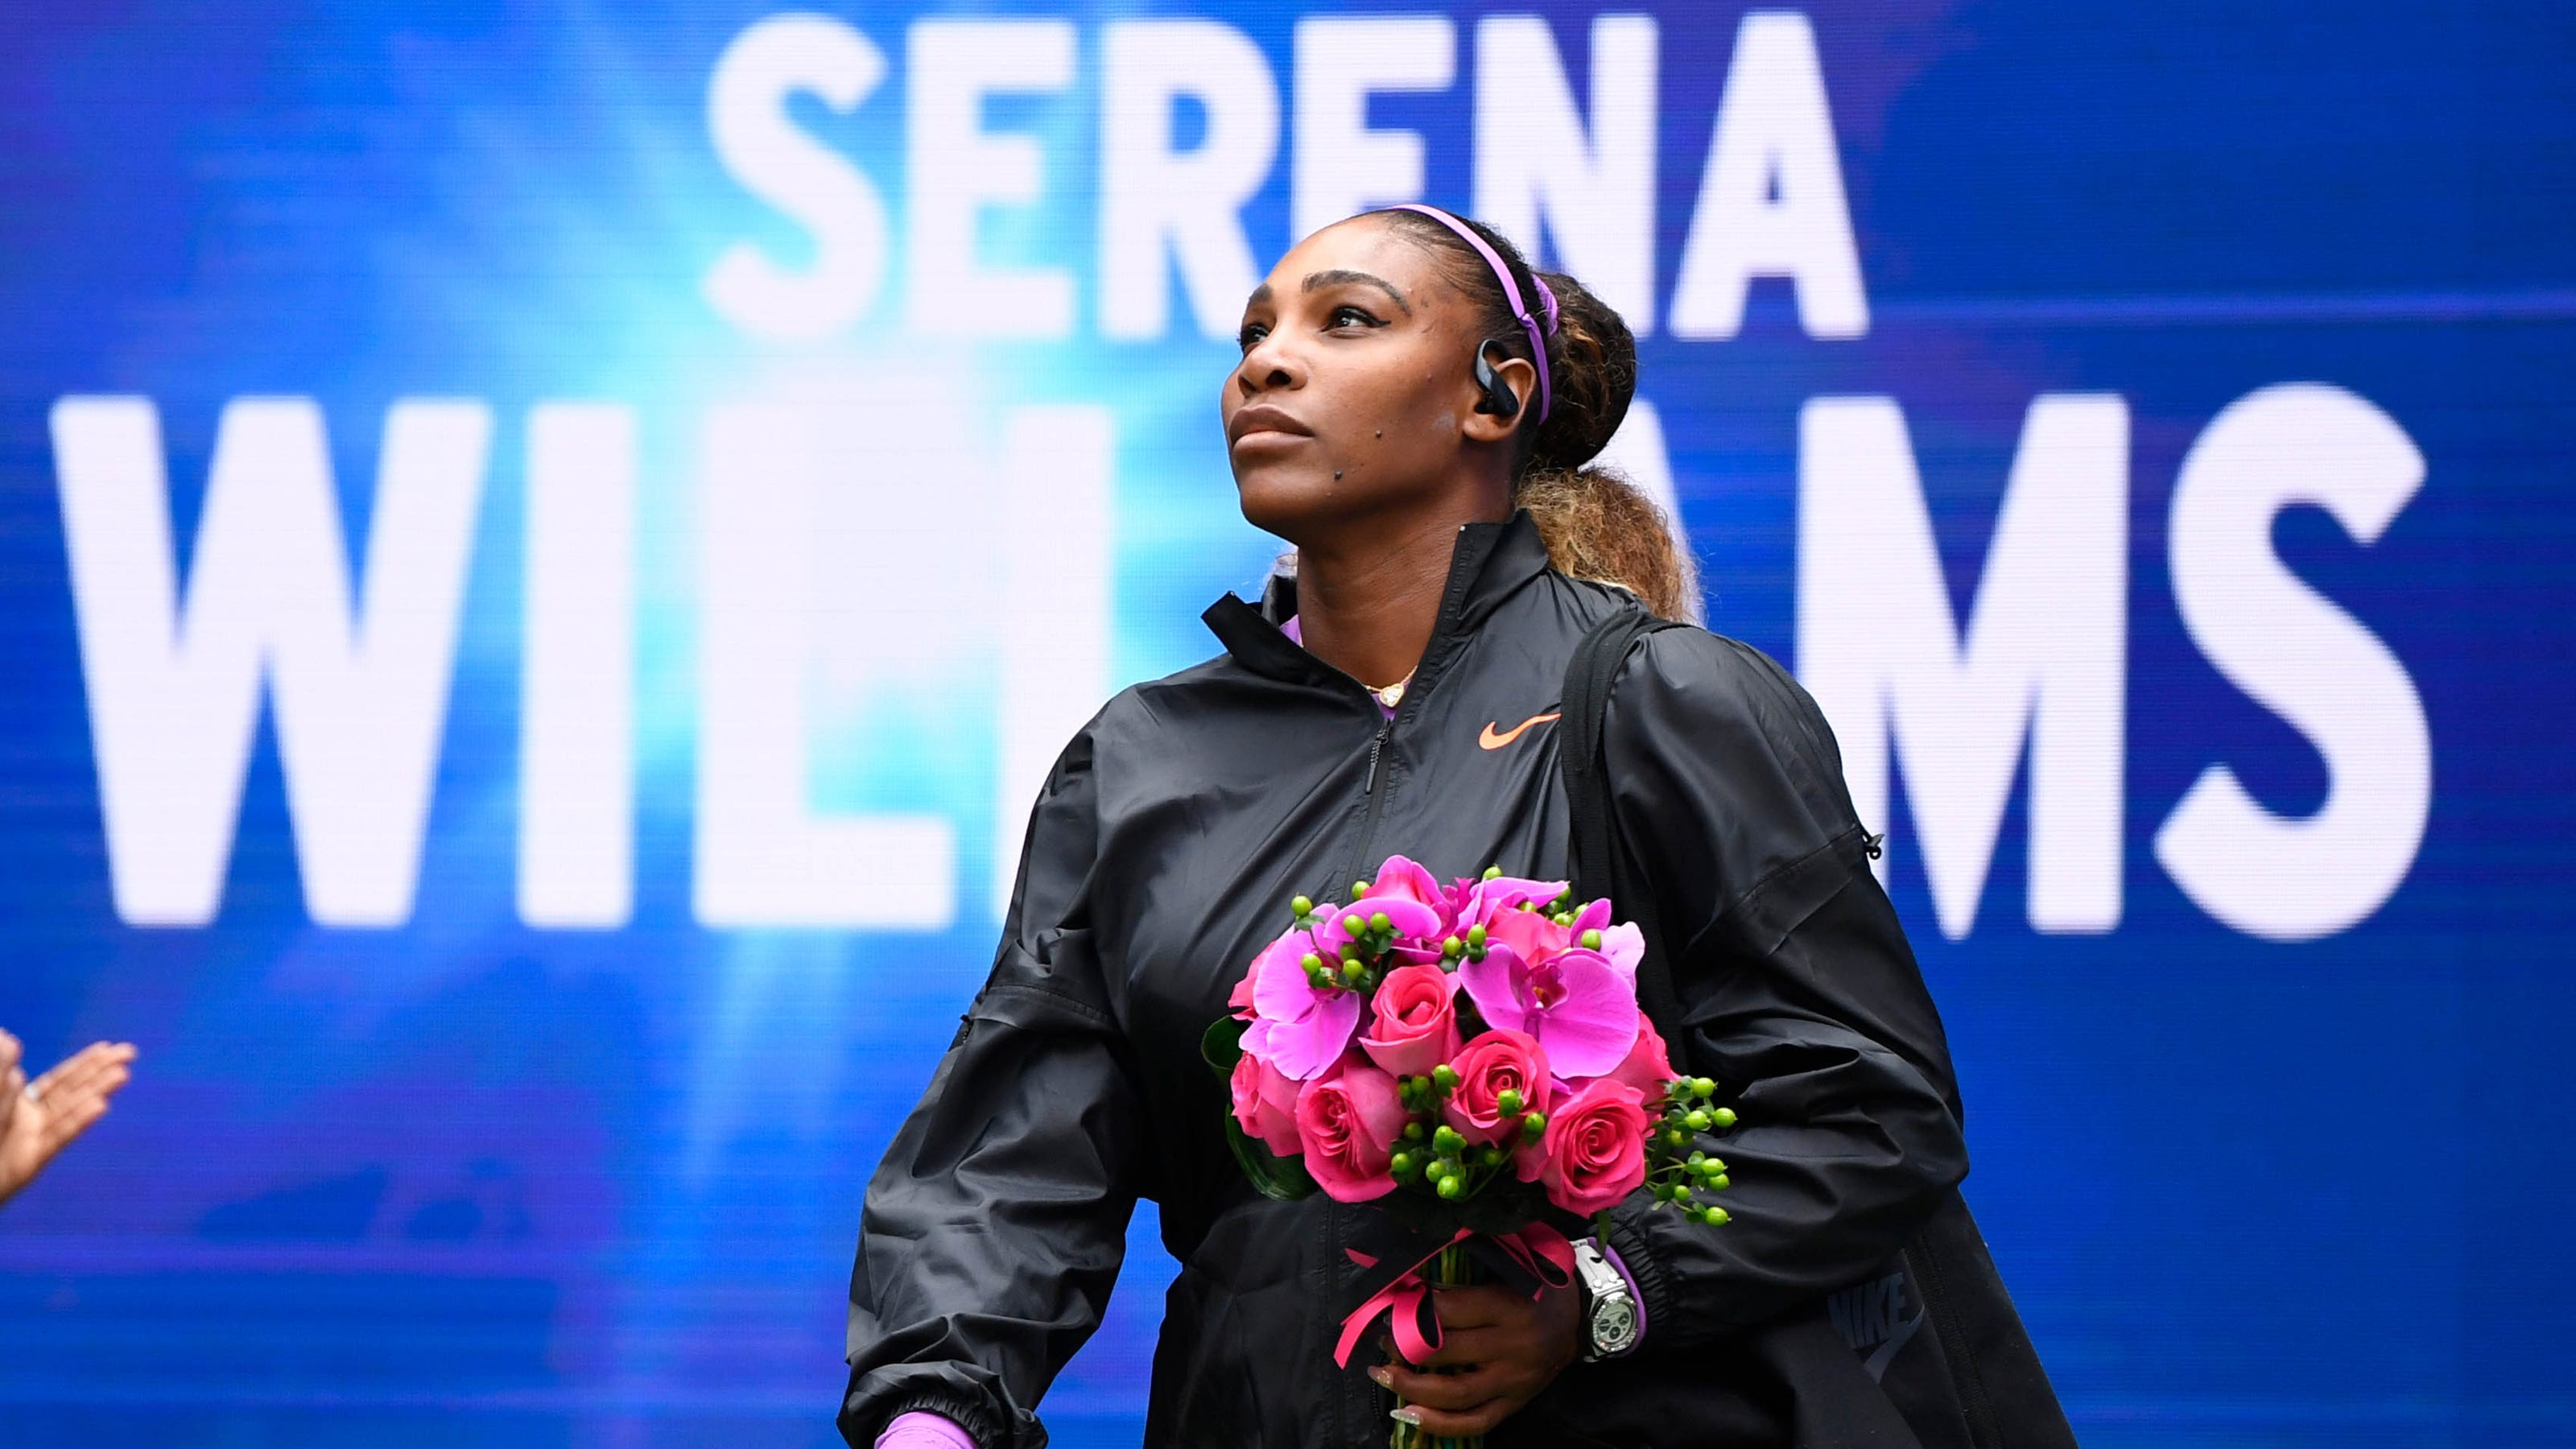 calling-serena-williams-the-goat-doesn-t-reflect-her-impact-on-sports-and-society-or-opinion